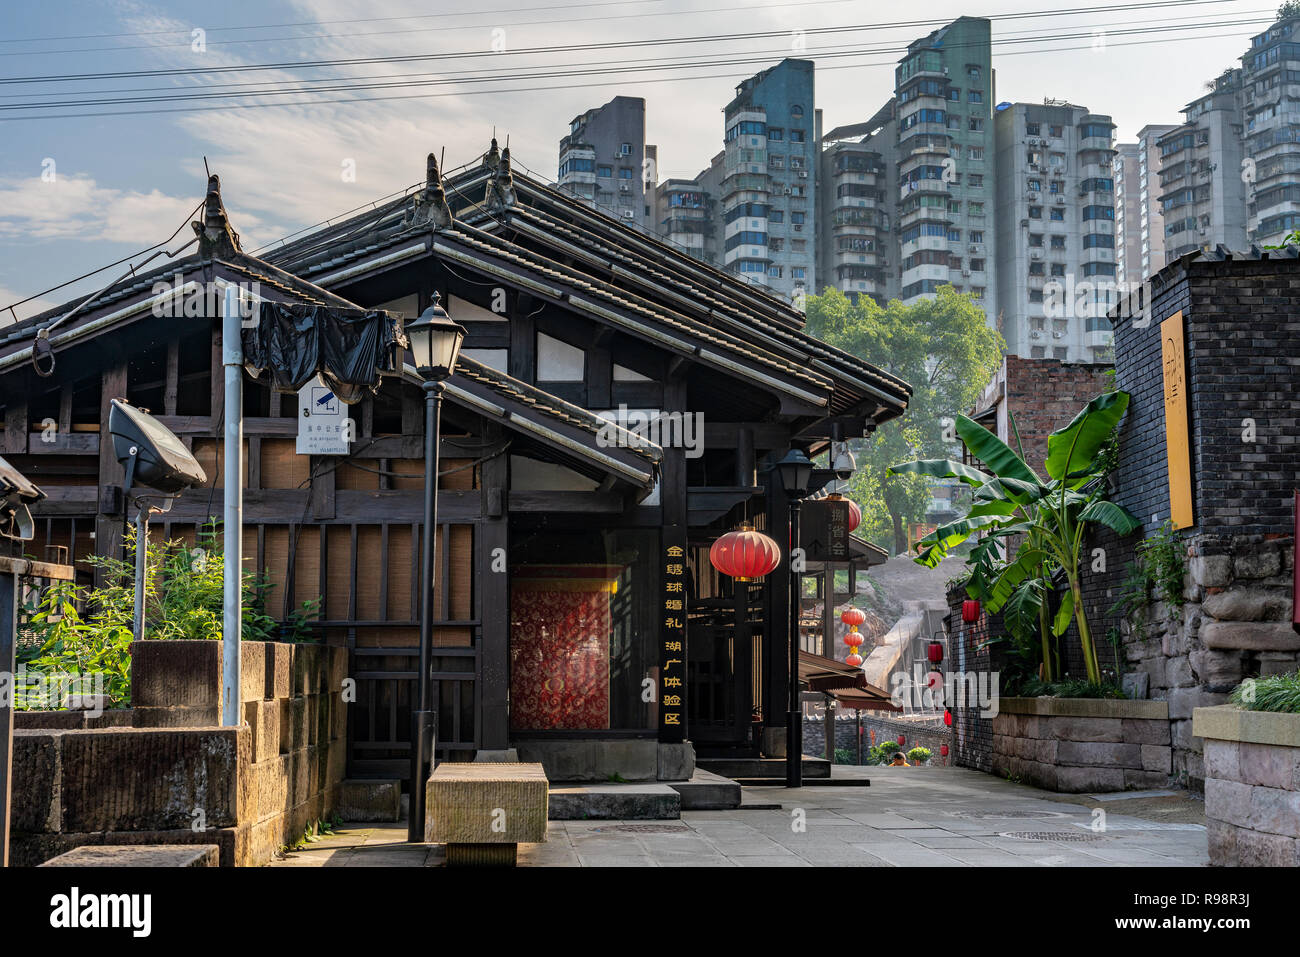 CHONGQING, CHINA - SEPTEMBER 19: Traditional Chinese architecture at Xia Hong Xue alley on September 19, 2018 in Chongqing Stock Photo